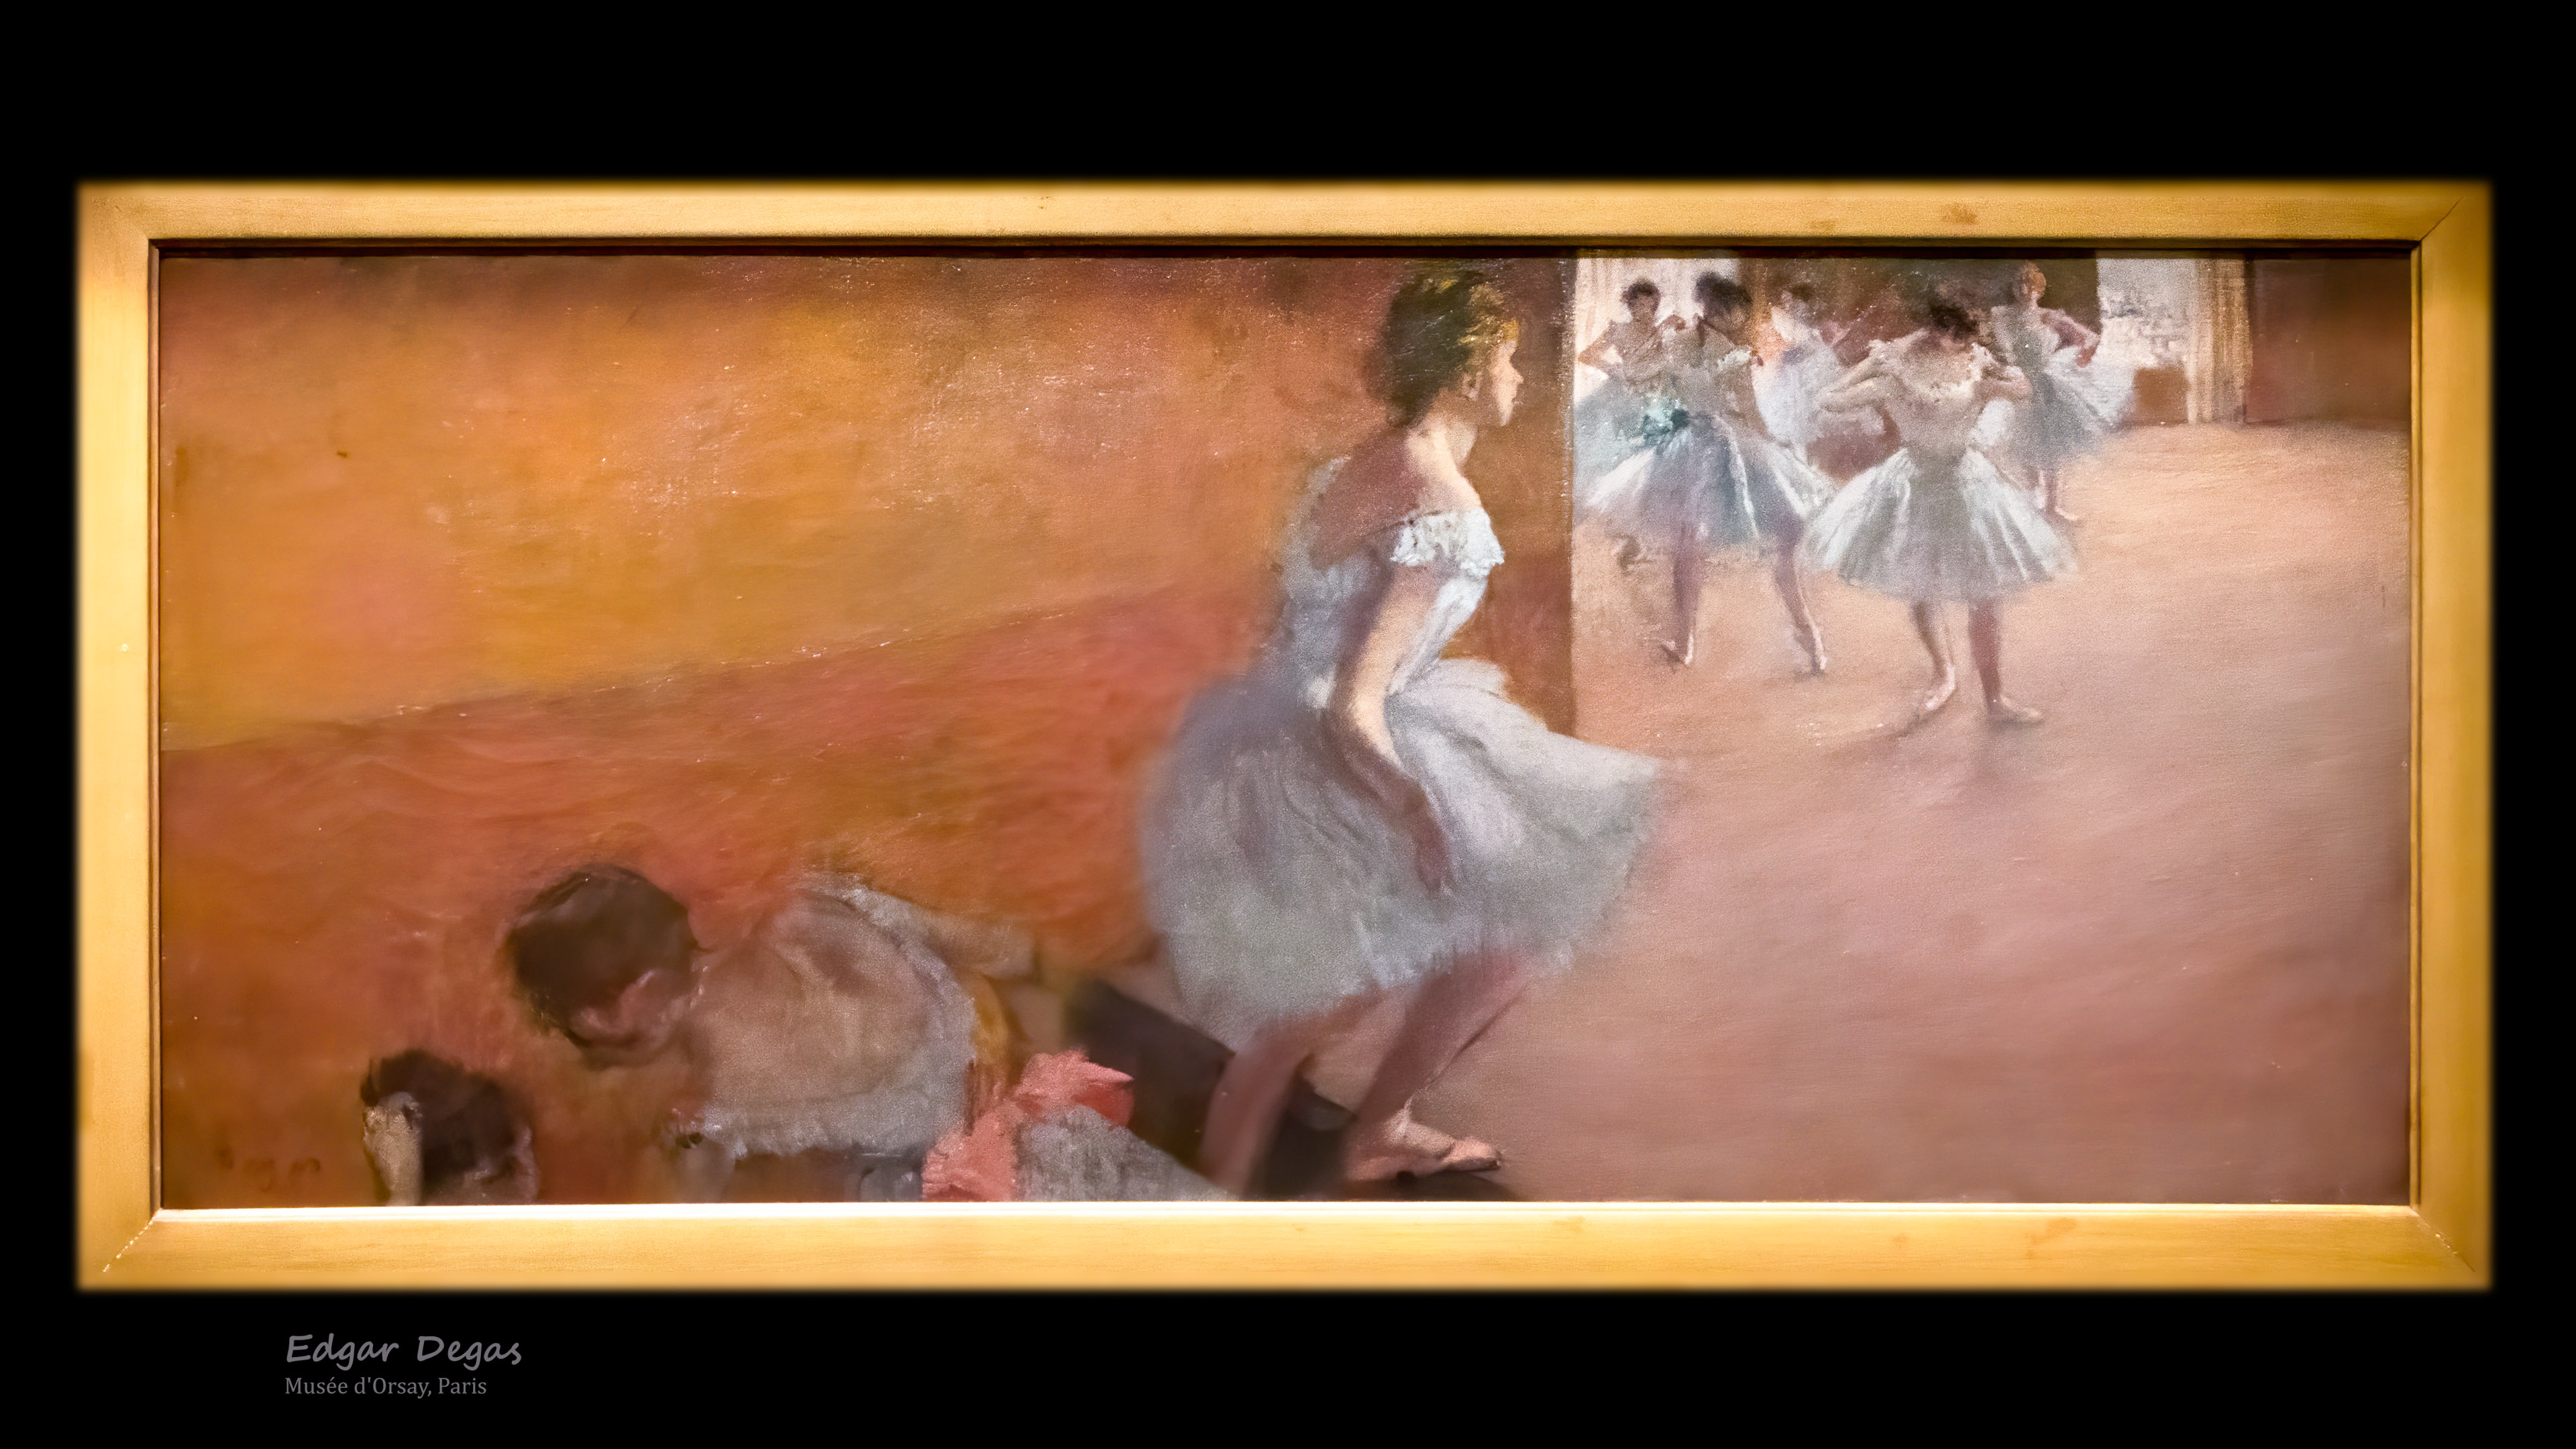 Adorn your device with a Degas famous paintings wallpaper, featuring his masterpieces in stunning detail and clarity in 4K ultra HD resolutions.